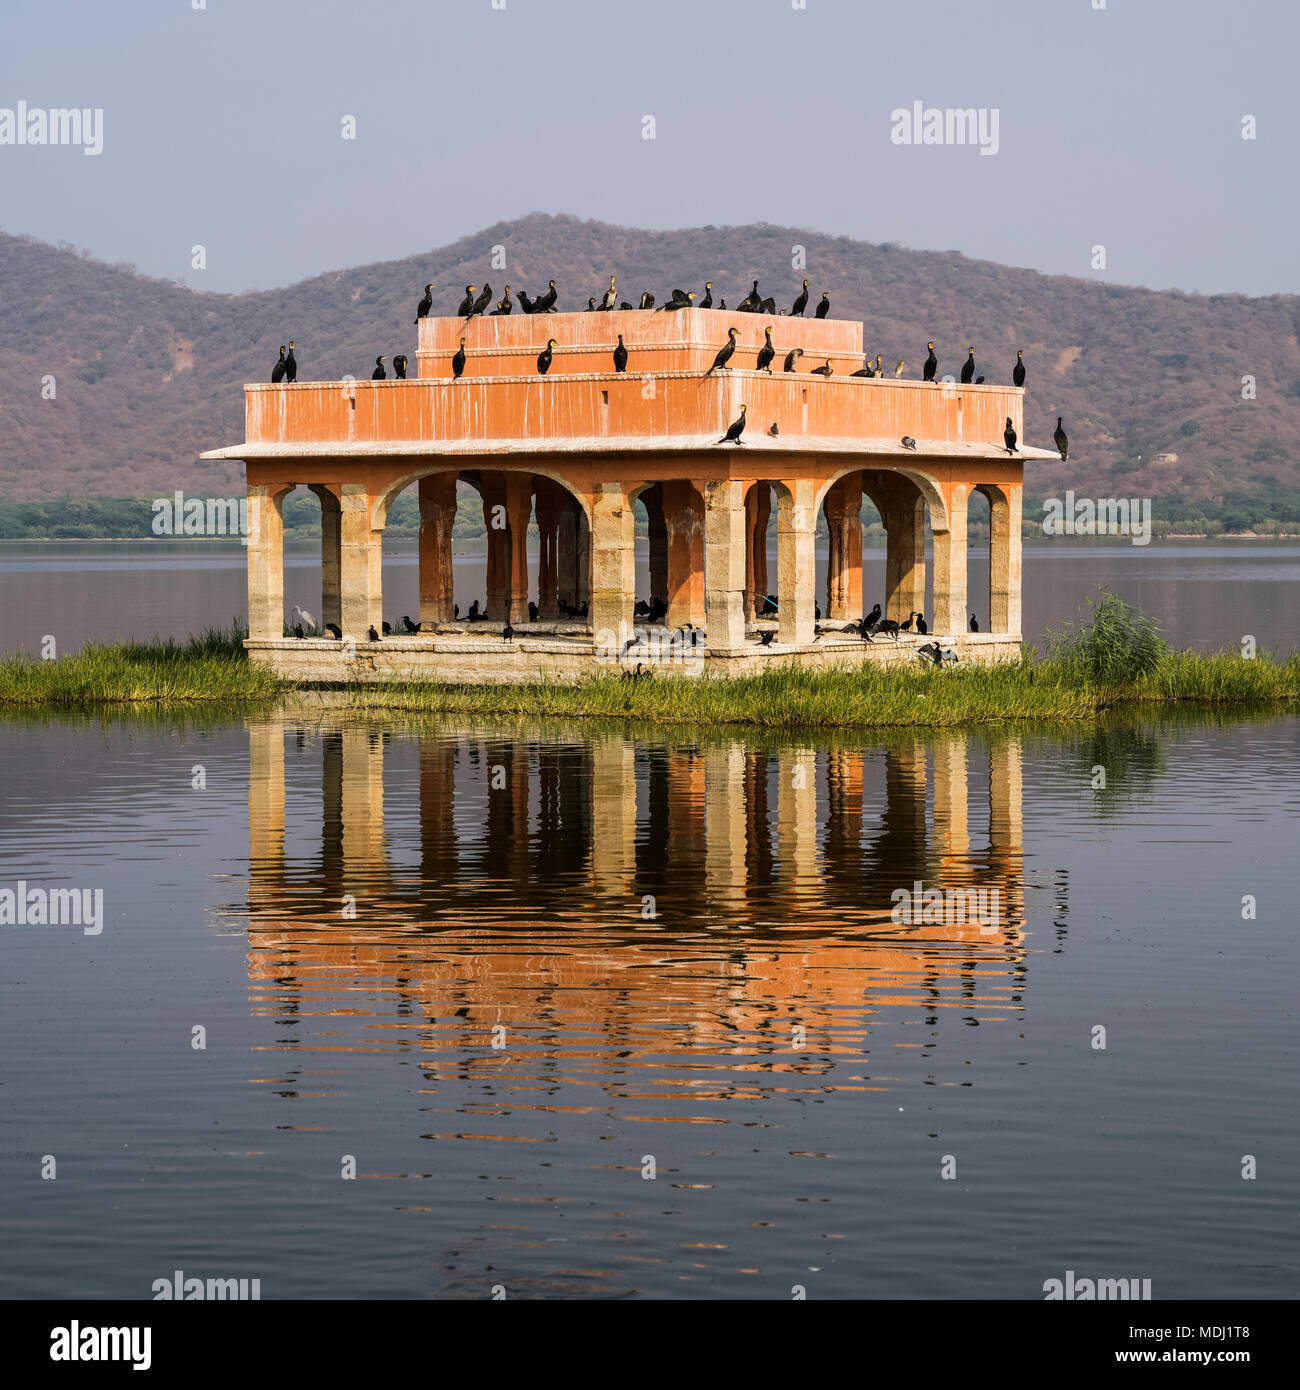 Jal Mahal Palace submerged in Man Sugar Lake with birds perched on it; Jaipur, Rajasthan, India Stock Photo